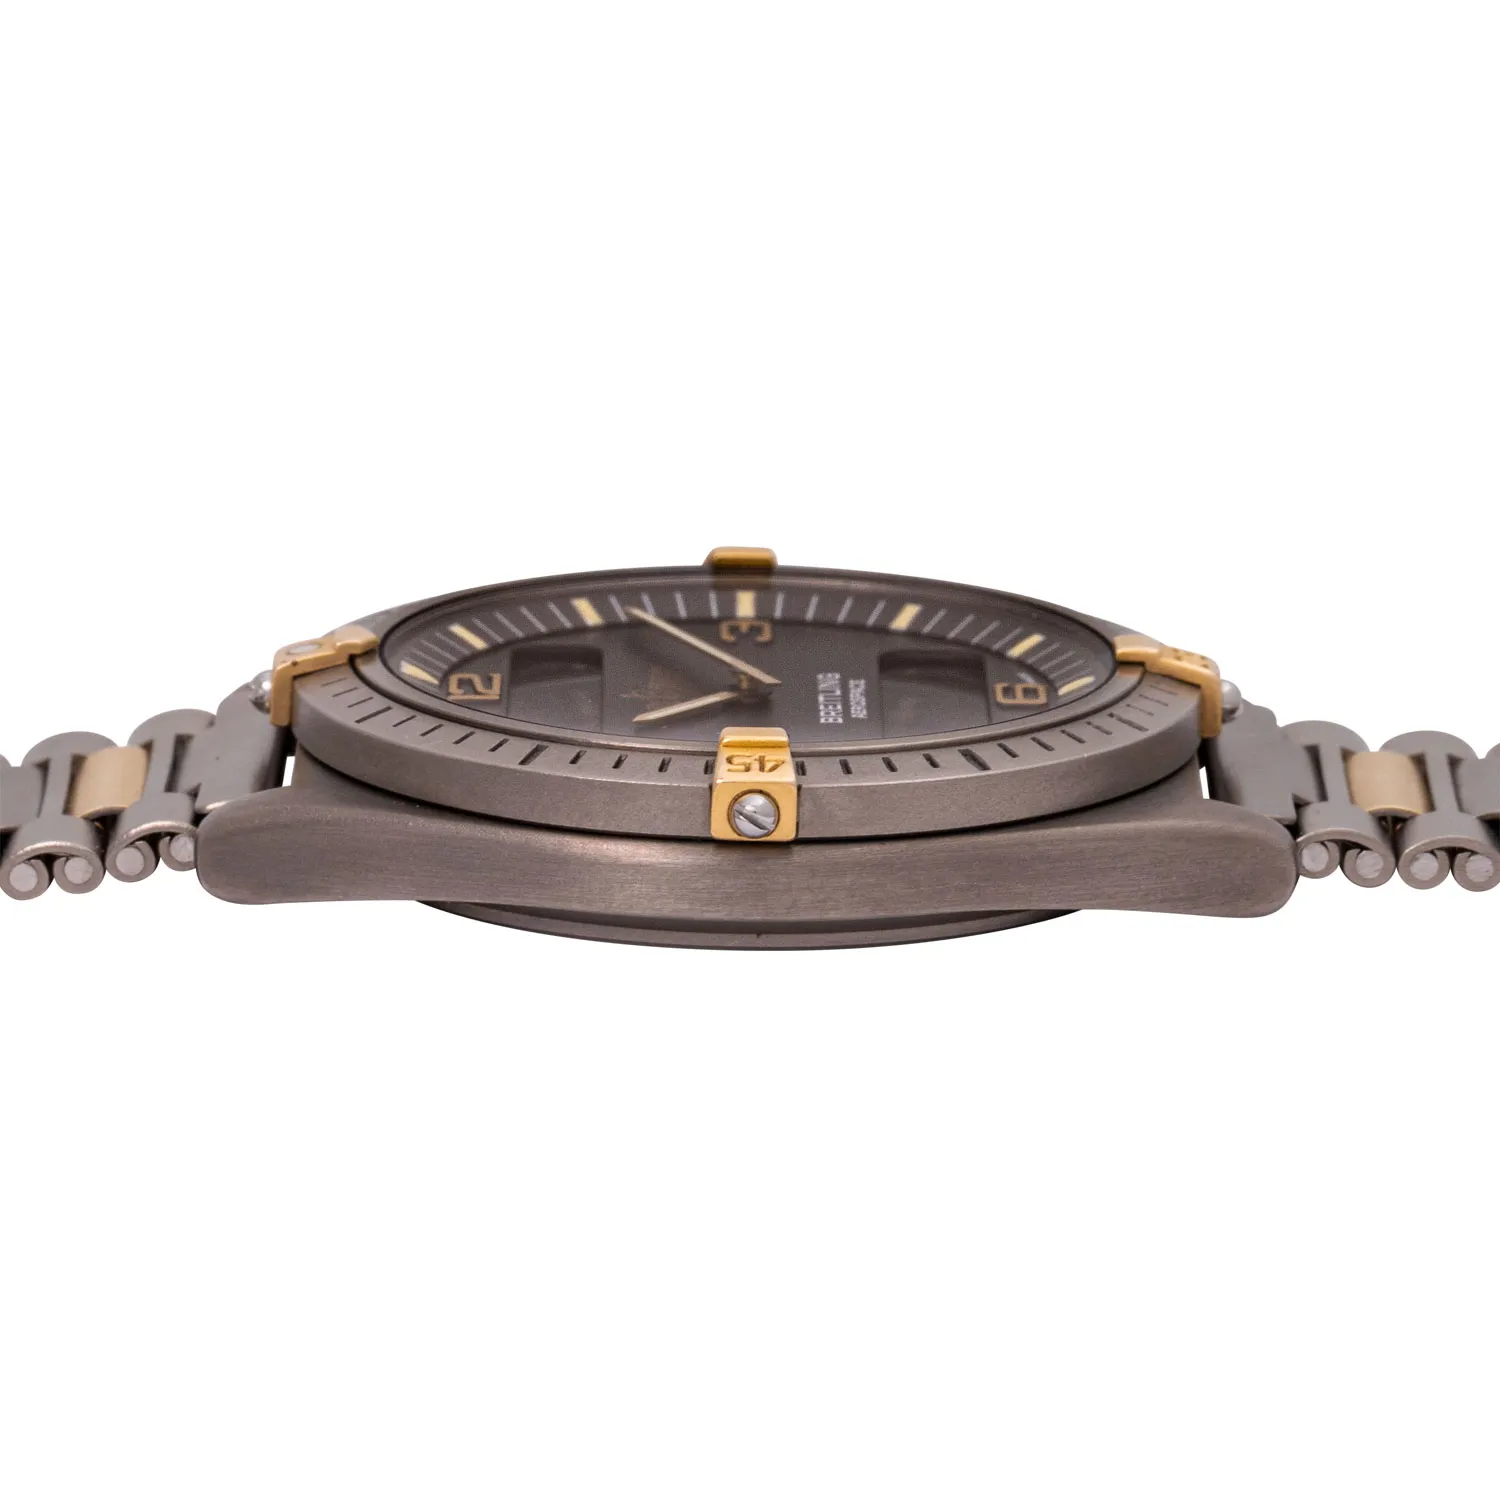 Breitling Aerospace F56061 40mm Titanium and gold-plated 2